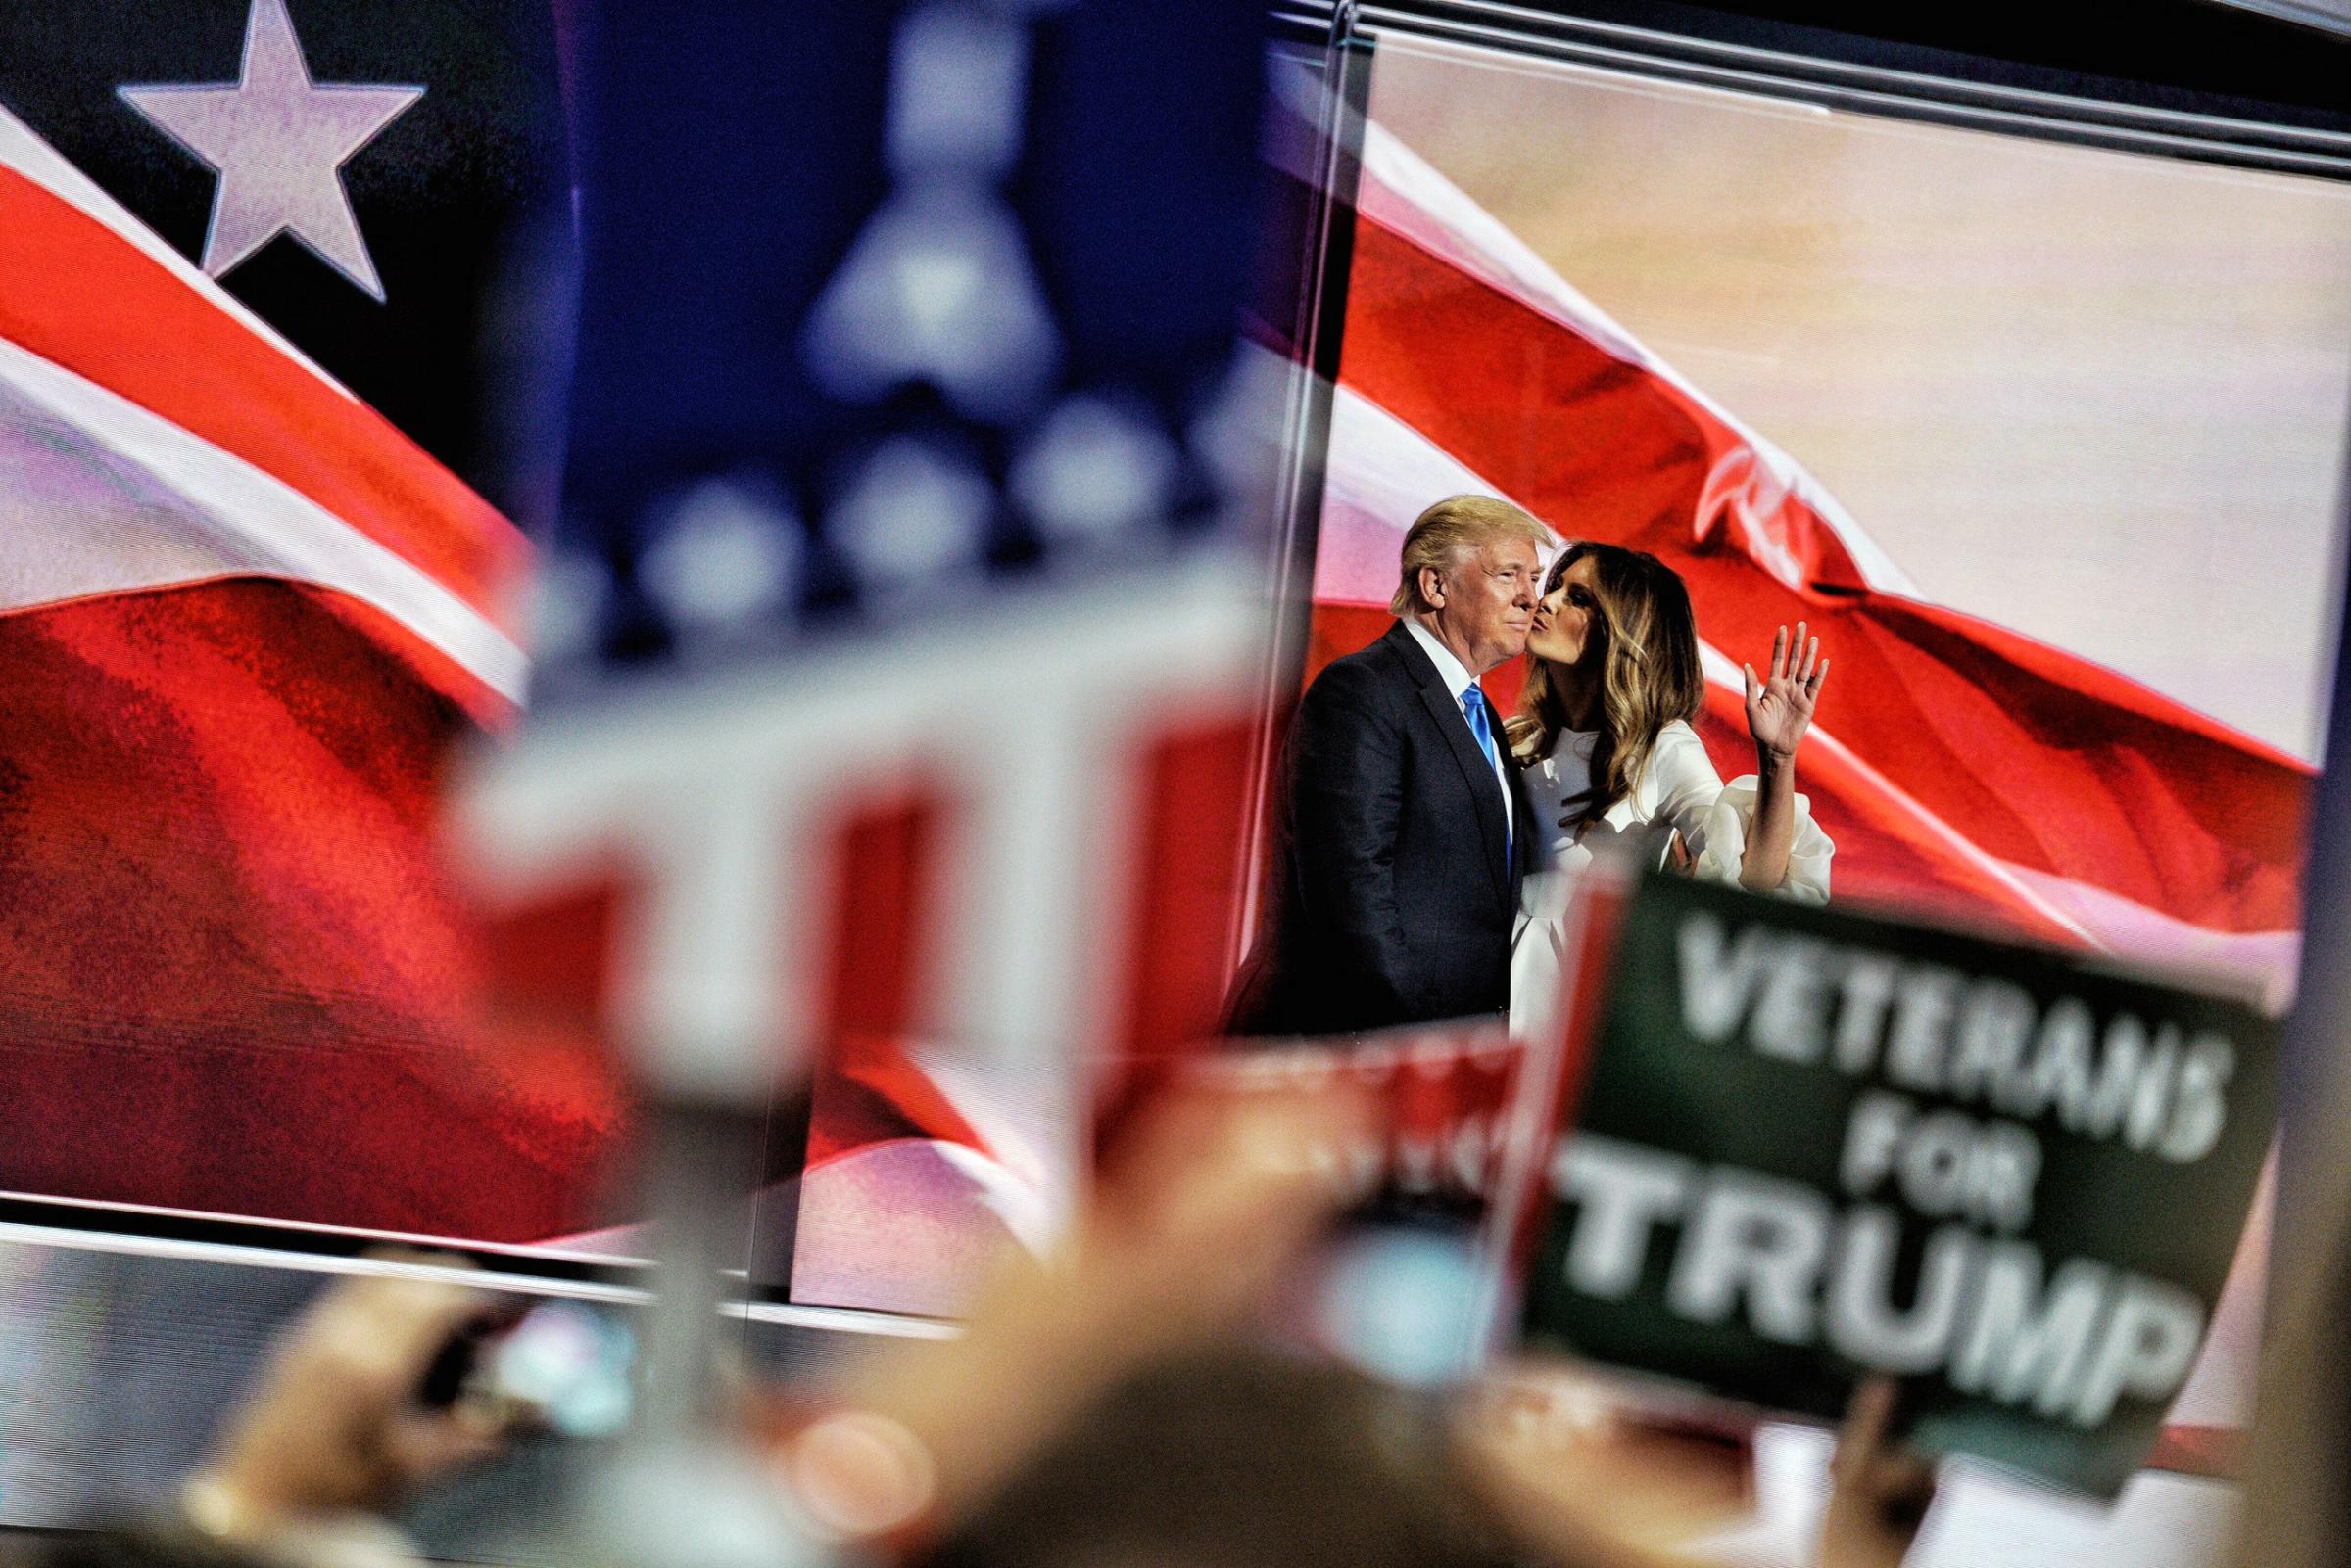 Melania Trump kisses her husband, Republican presidential candidate Donald Trump, to the applause of the ecstatic crowd, on July 18, 2016.